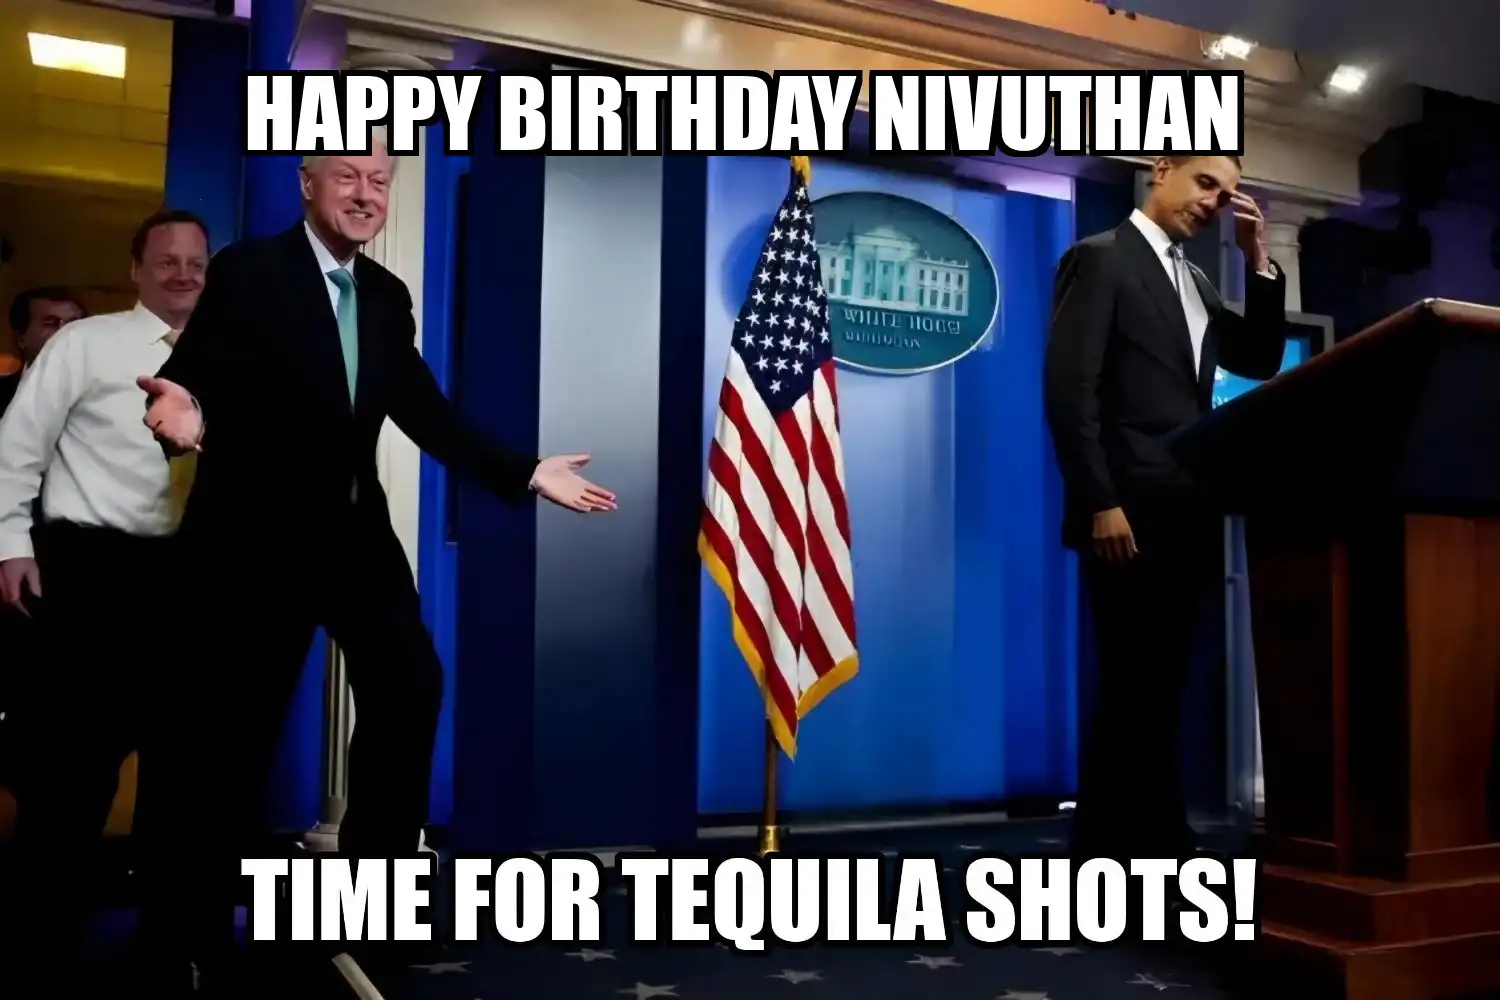 Happy Birthday Nivuthan Time For Tequila Shots Memes